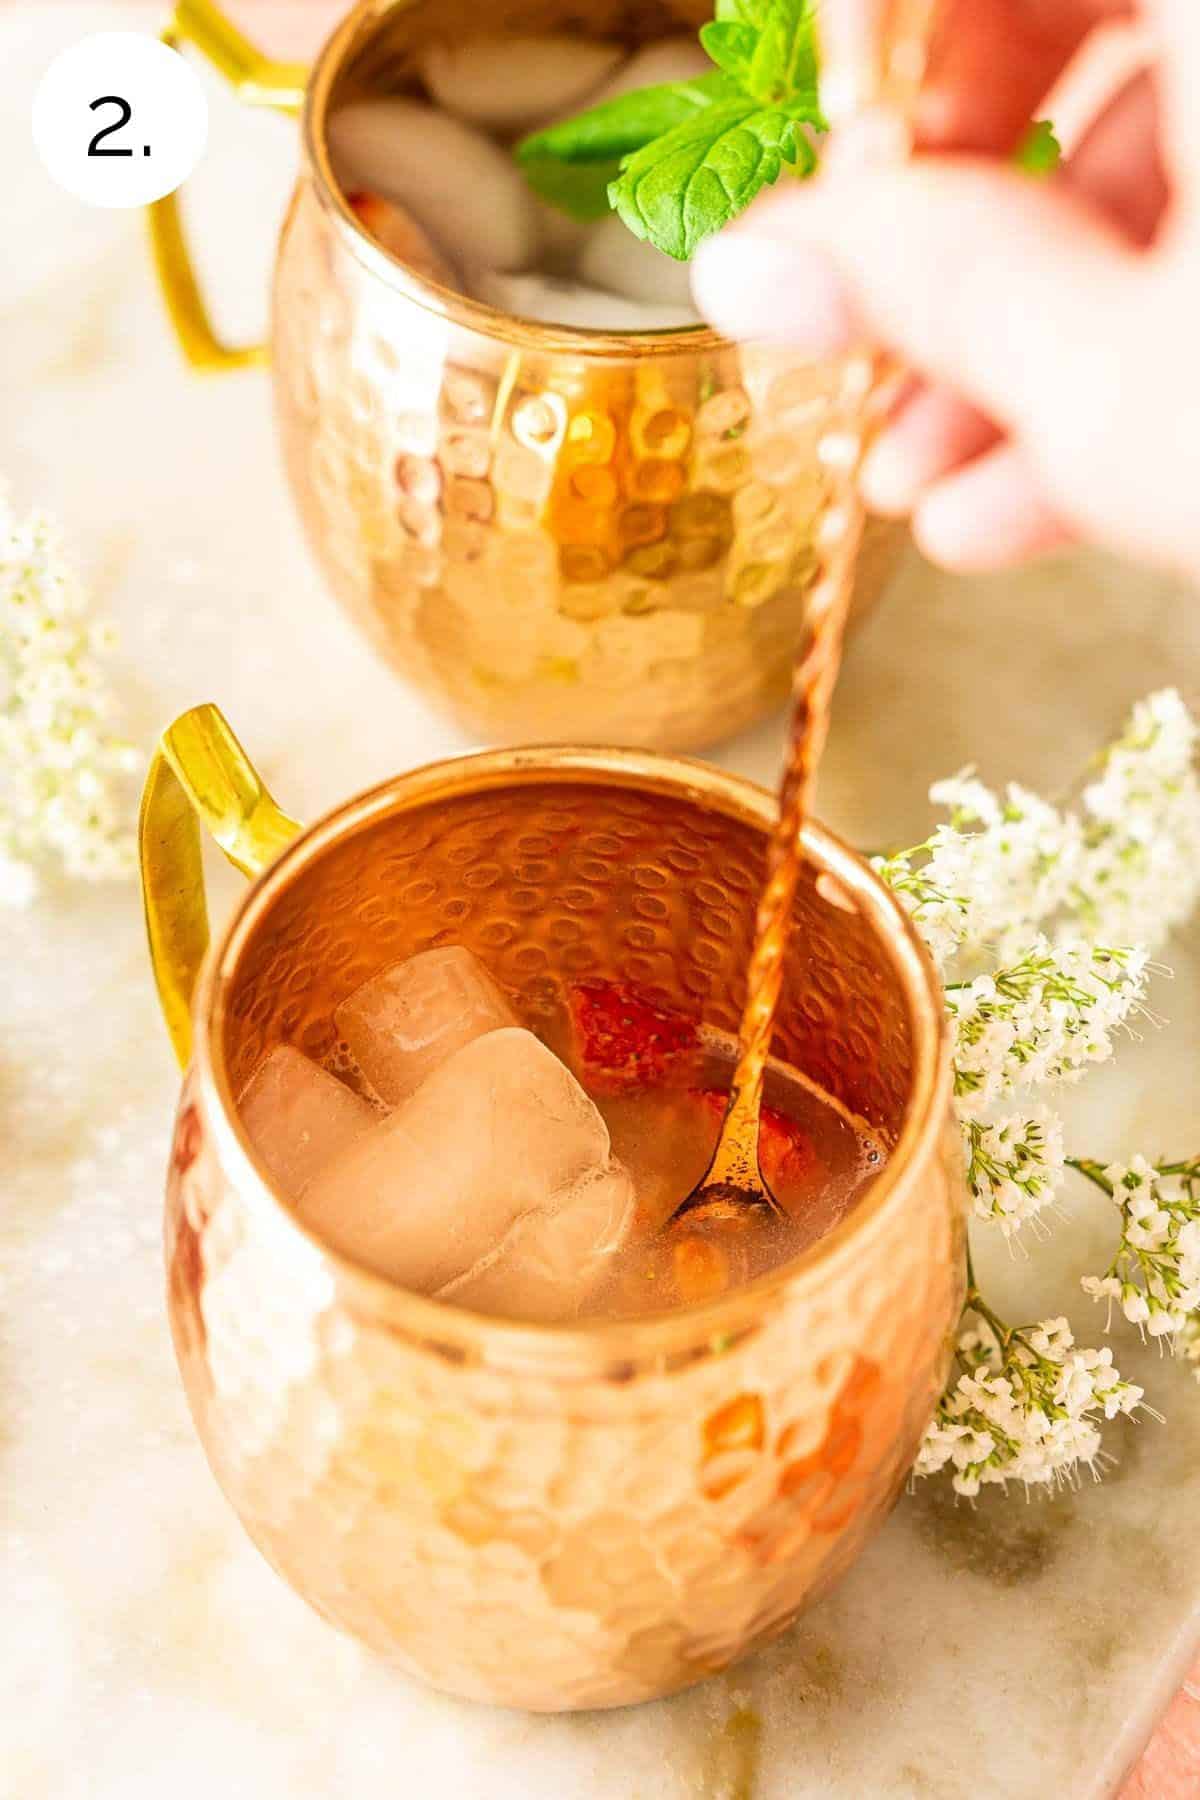 Stirring the ice and vodka in a copper mug to combine and chill the mixture.